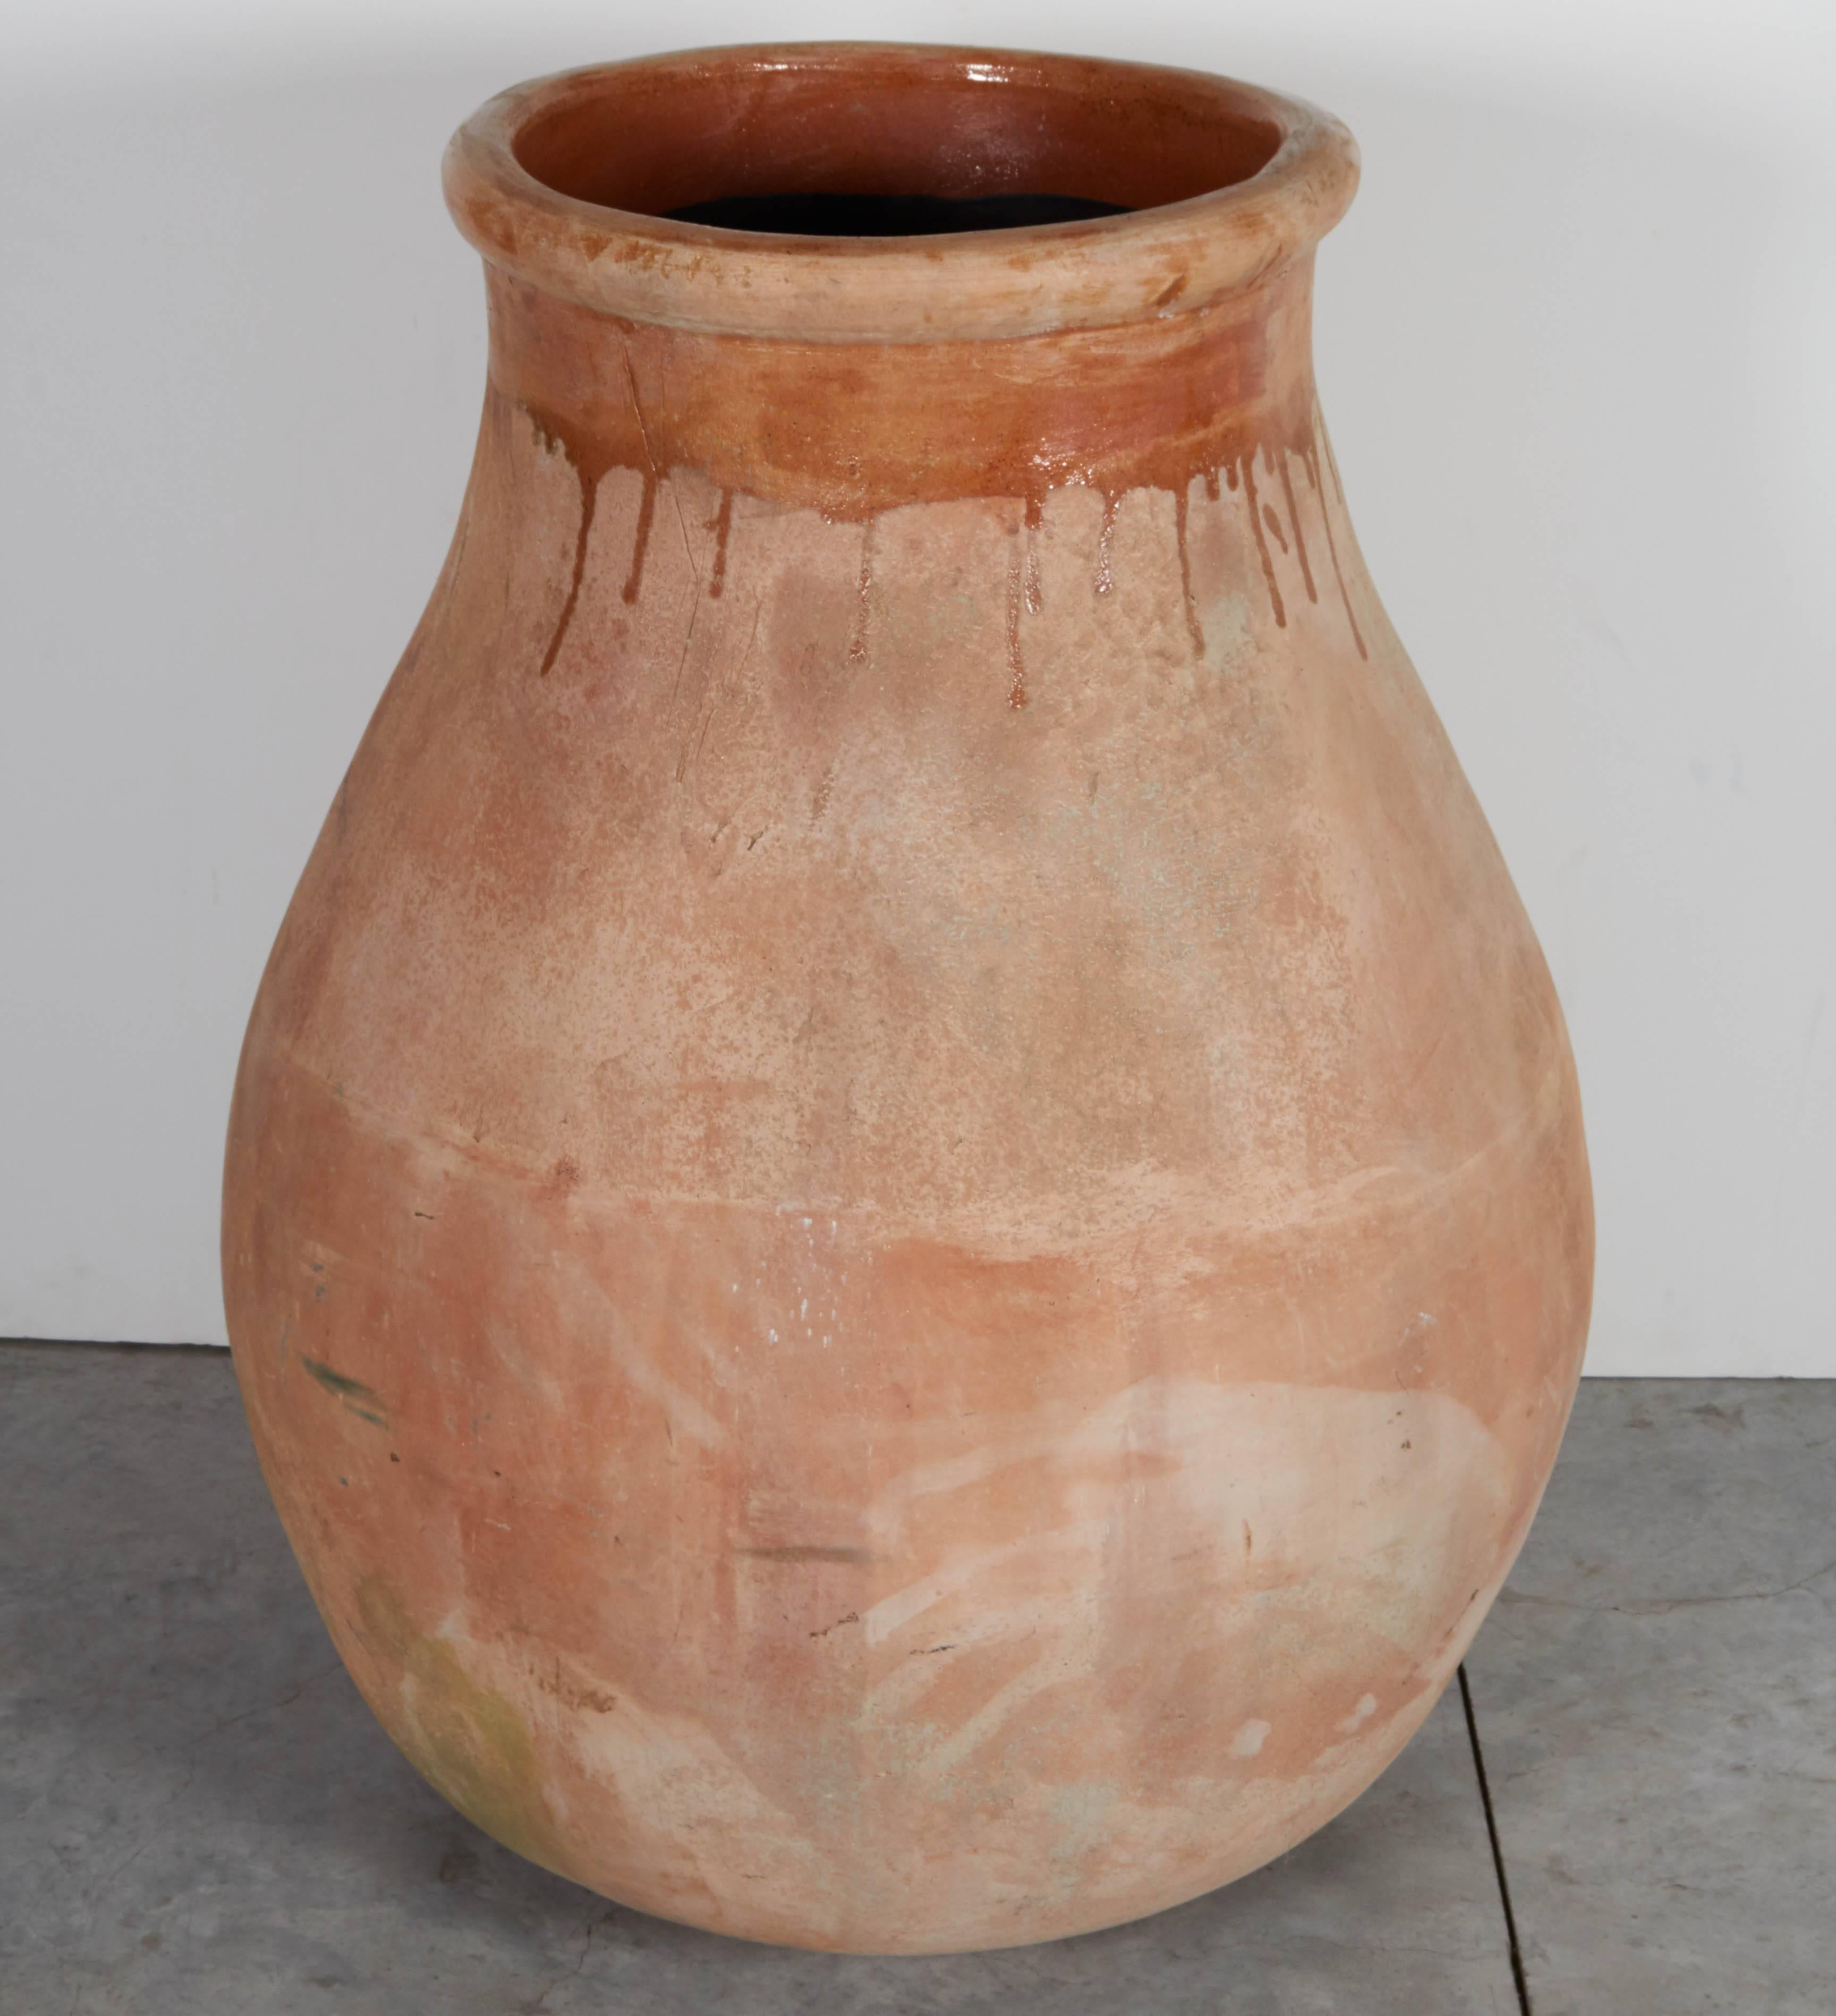 Tall, Graceful Earthenware Jar in Washed Out Mediterranean Hues For Sale 1